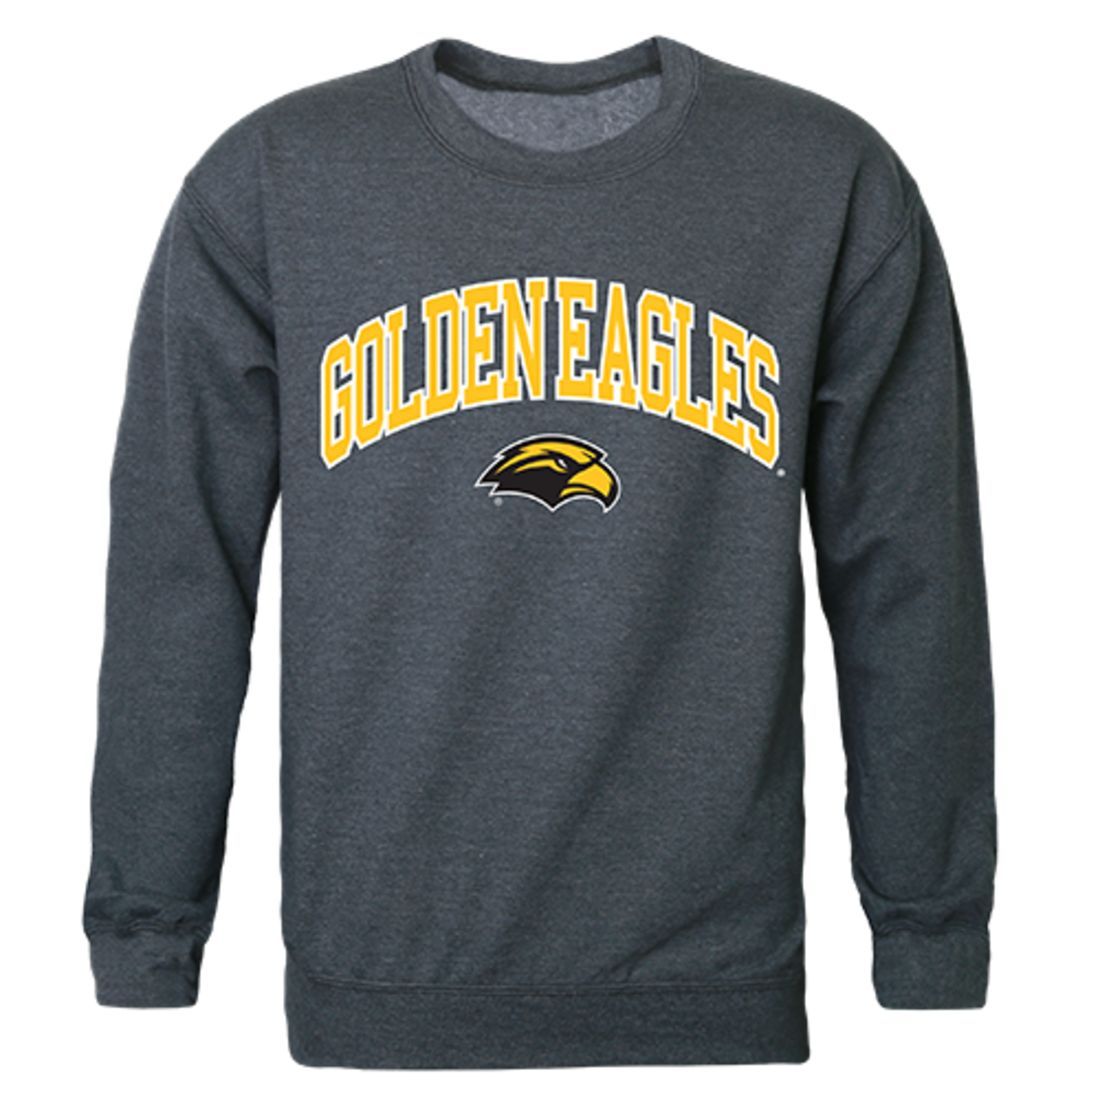 USM University of Southern Mississippi Campus Crewneck Pullover Sweatshirt Sweater Heather Charcoal-Campus-Wardrobe